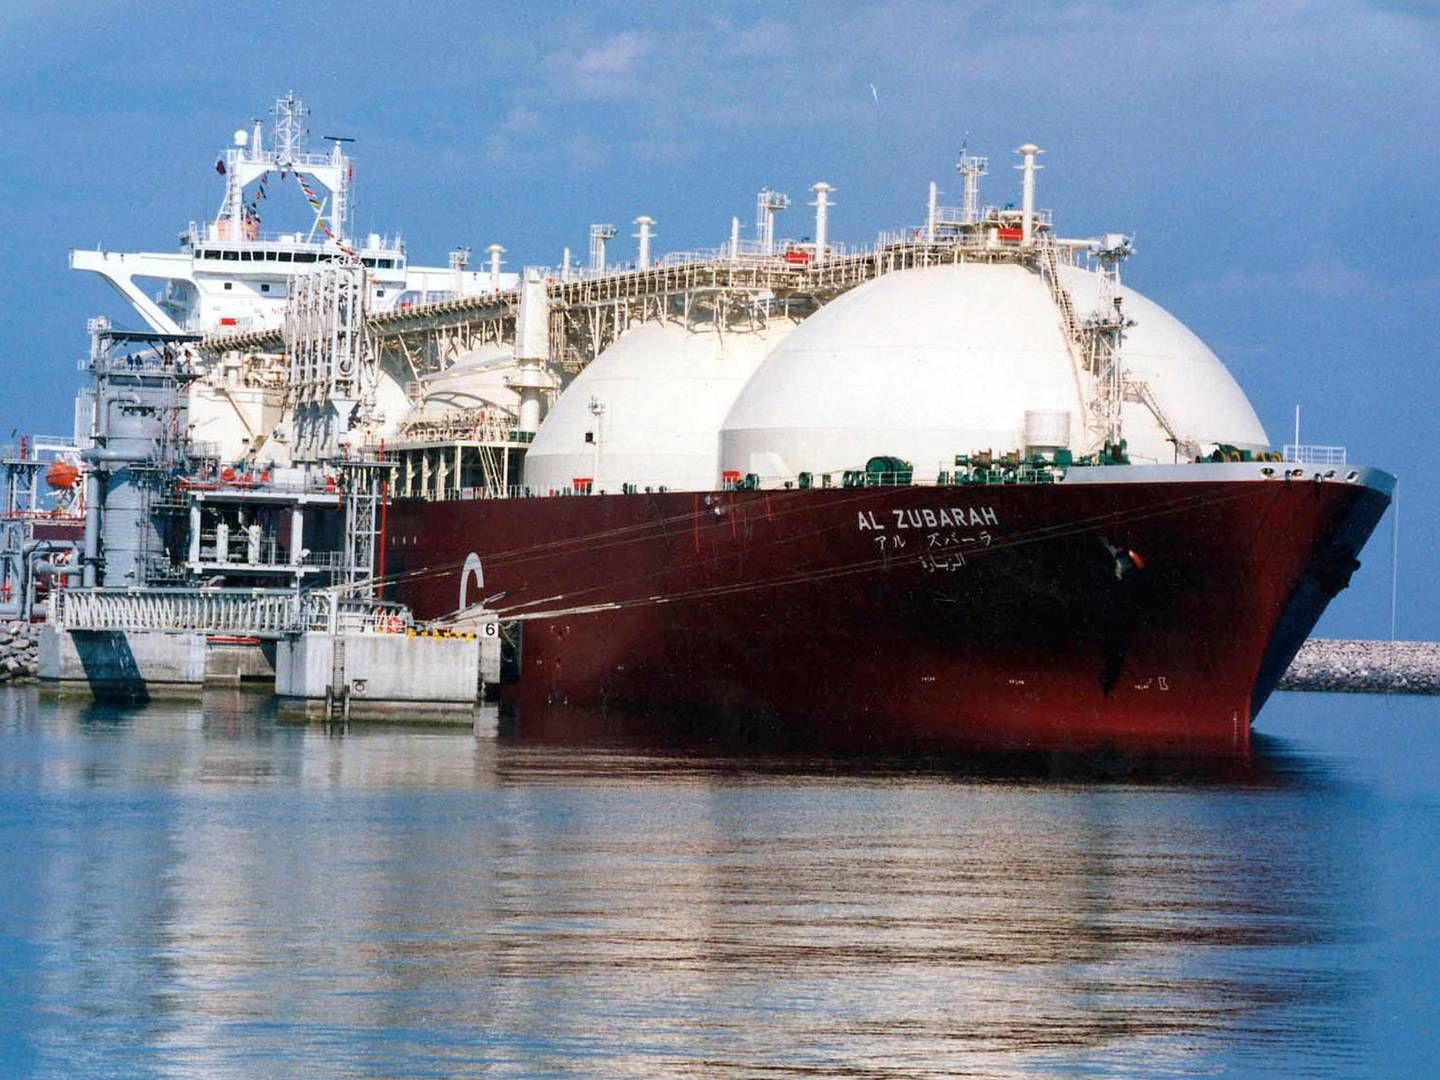 Qatar is the world's largest exporter of liquefied natural gas, and volumes are expected to increase in the coming years. | Photo: Uncredited/AP/Ritzau Scanpix